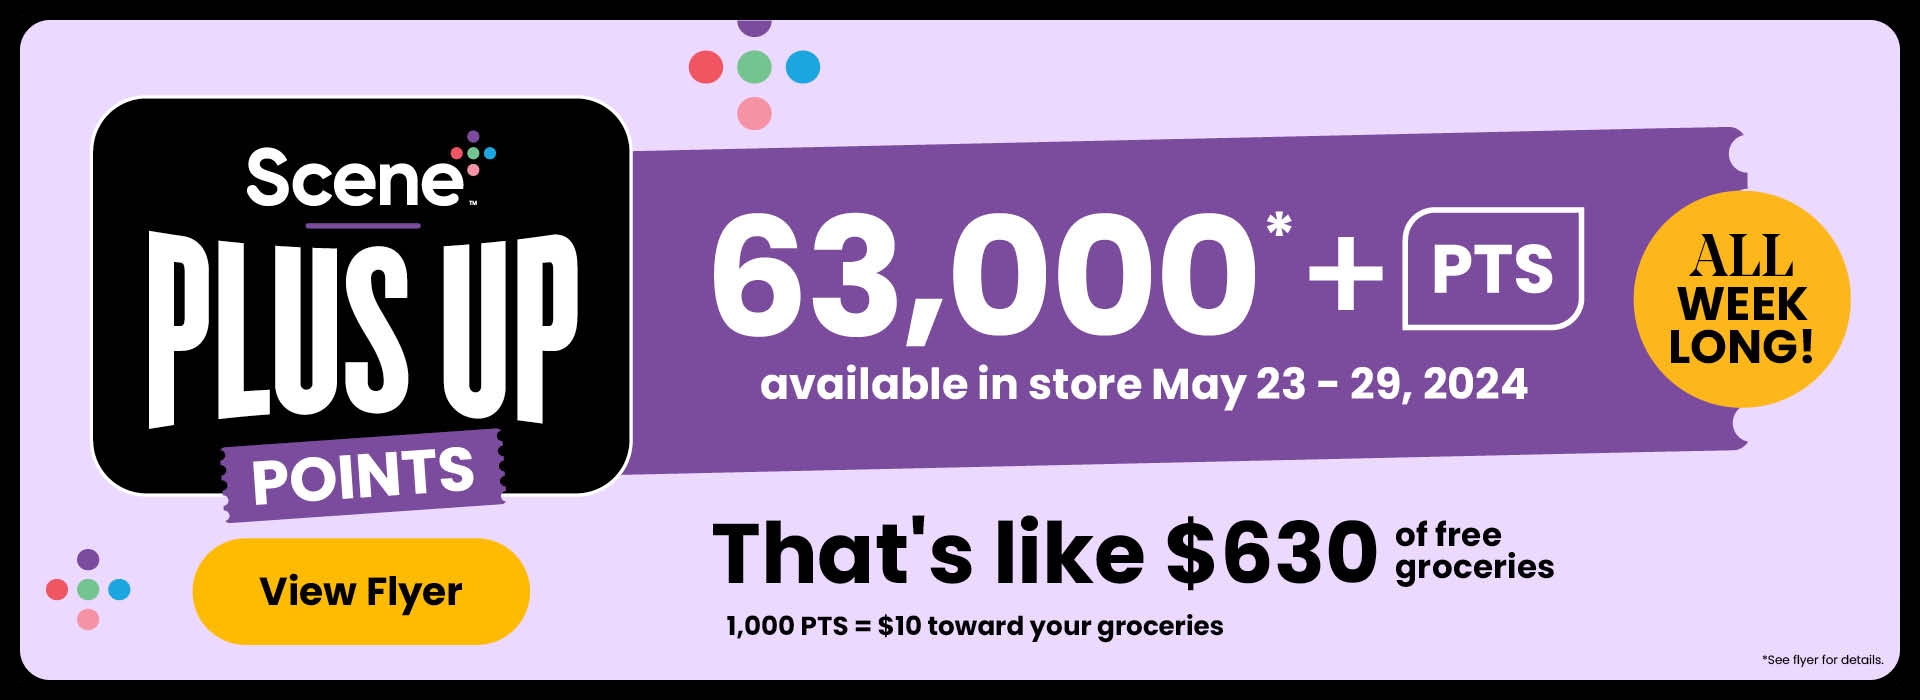 All Week Long! Scene+ Plus Up Points. Over 63,000 PTS available in-store. That's like $630 toward your groceries. 1,000 PTS = $10 toward your groceres. See flyer or in-store for participating products.